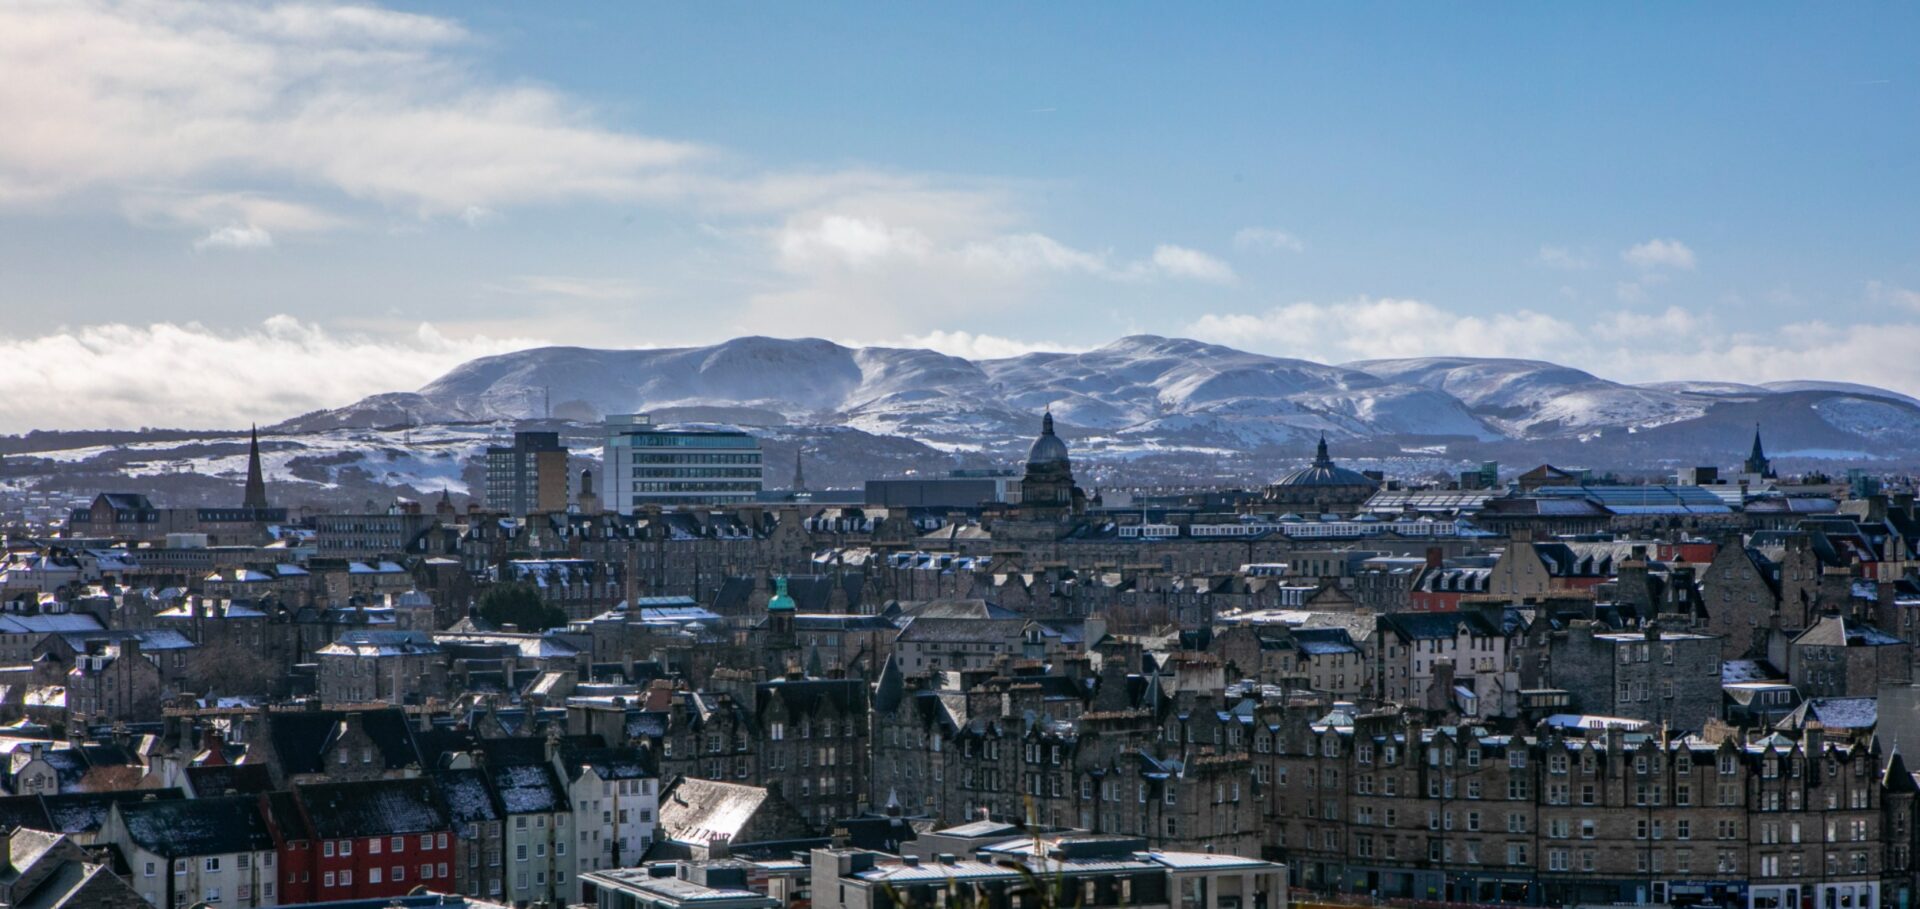 Old town with Pentland Hills and snow